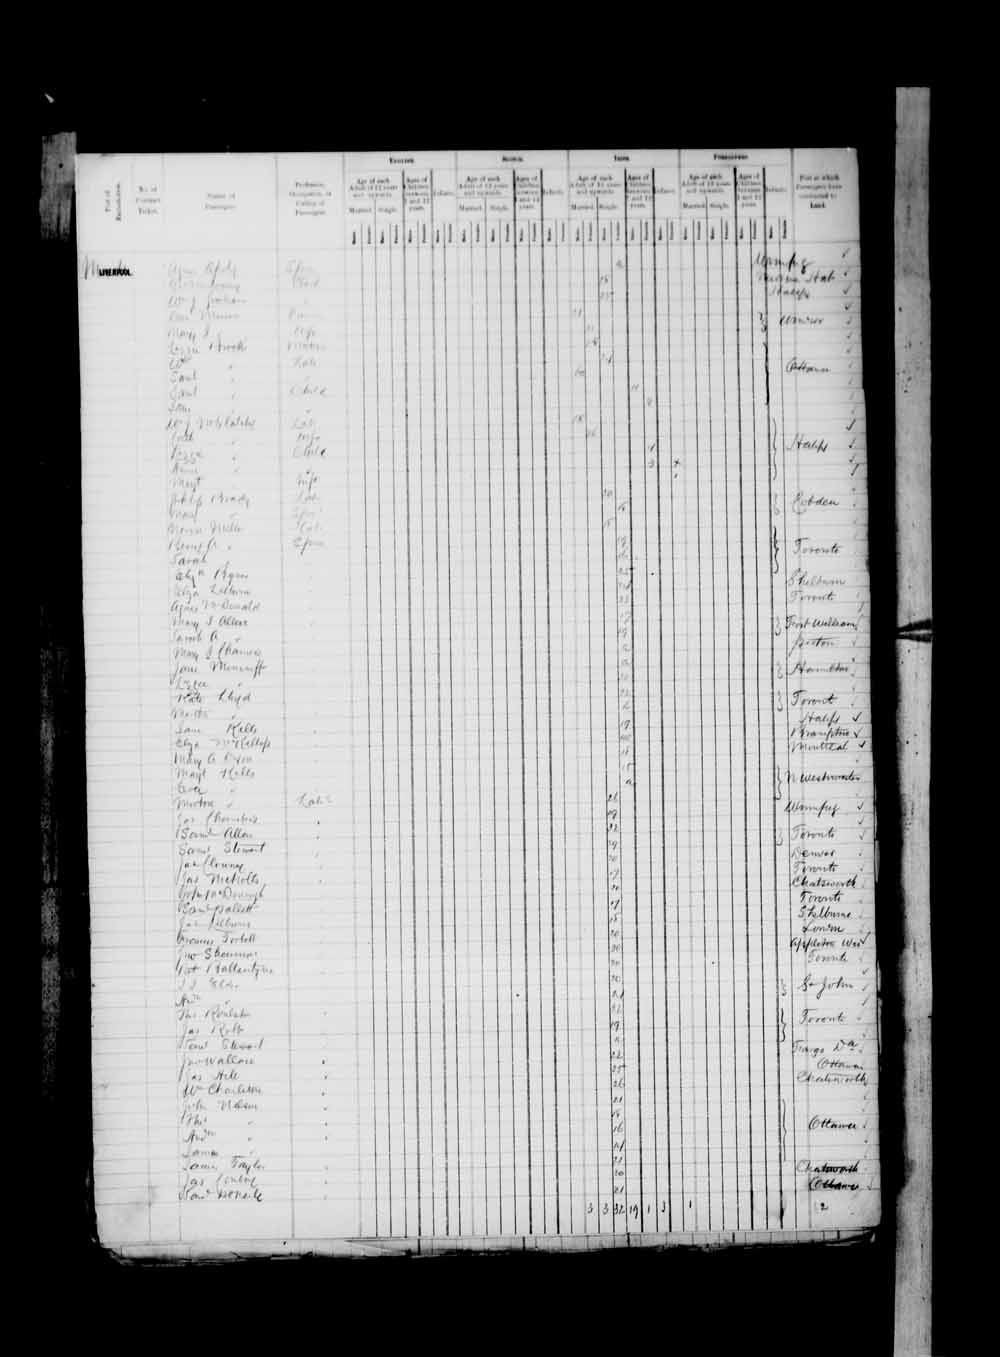 Digitized page of Passenger Lists for Image No.: e003674934